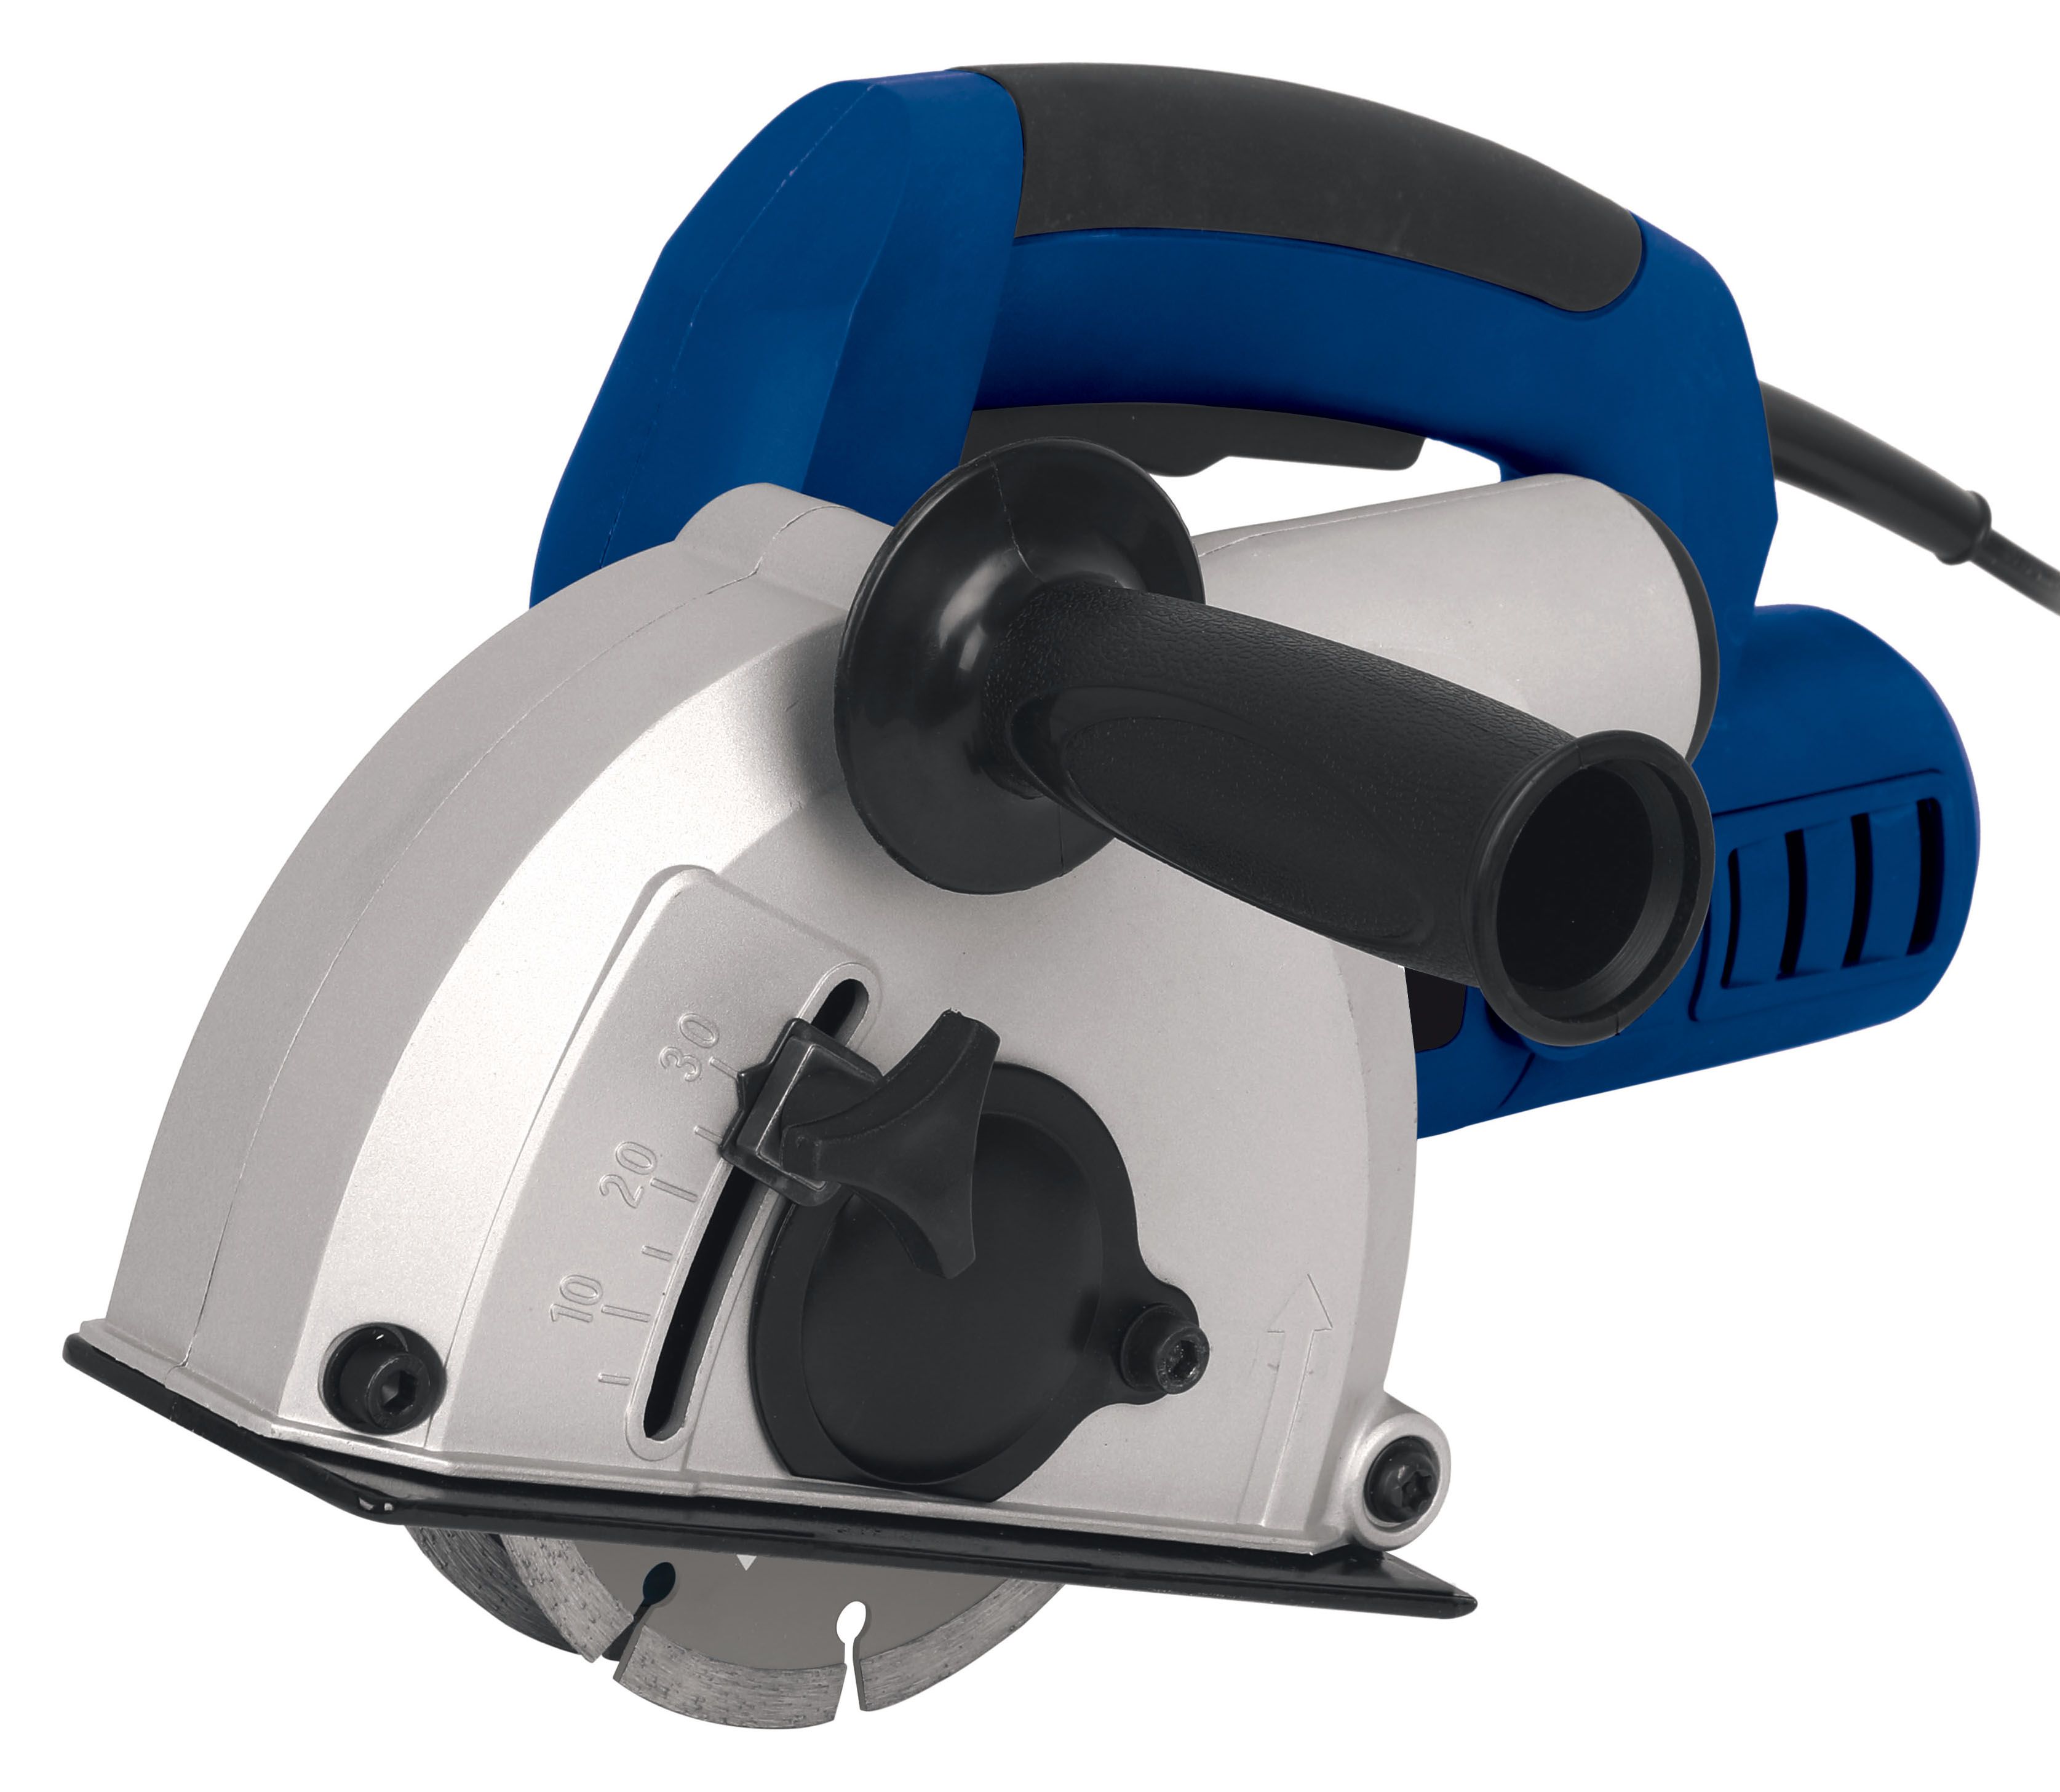 Image of Wickes Corded Wall Chaser Angle Grinder - 1500W